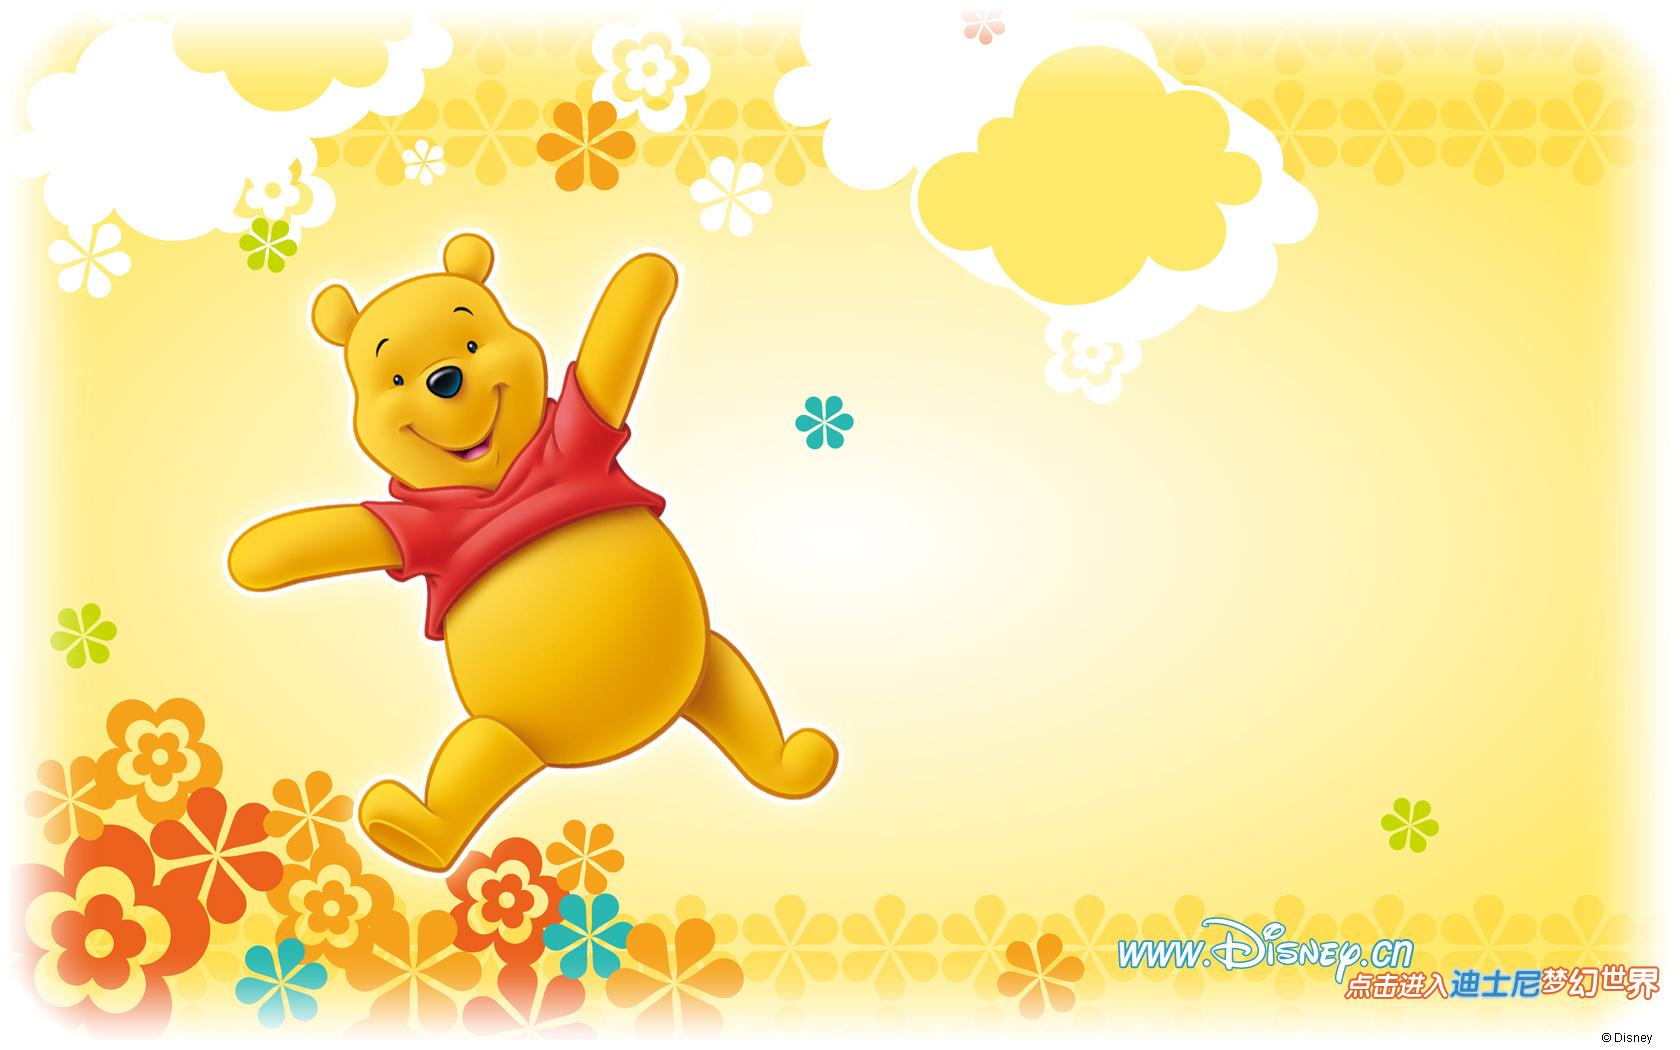 Wallpapers Hd Winnie The Pooh Baby Background Wallpaper Gallery